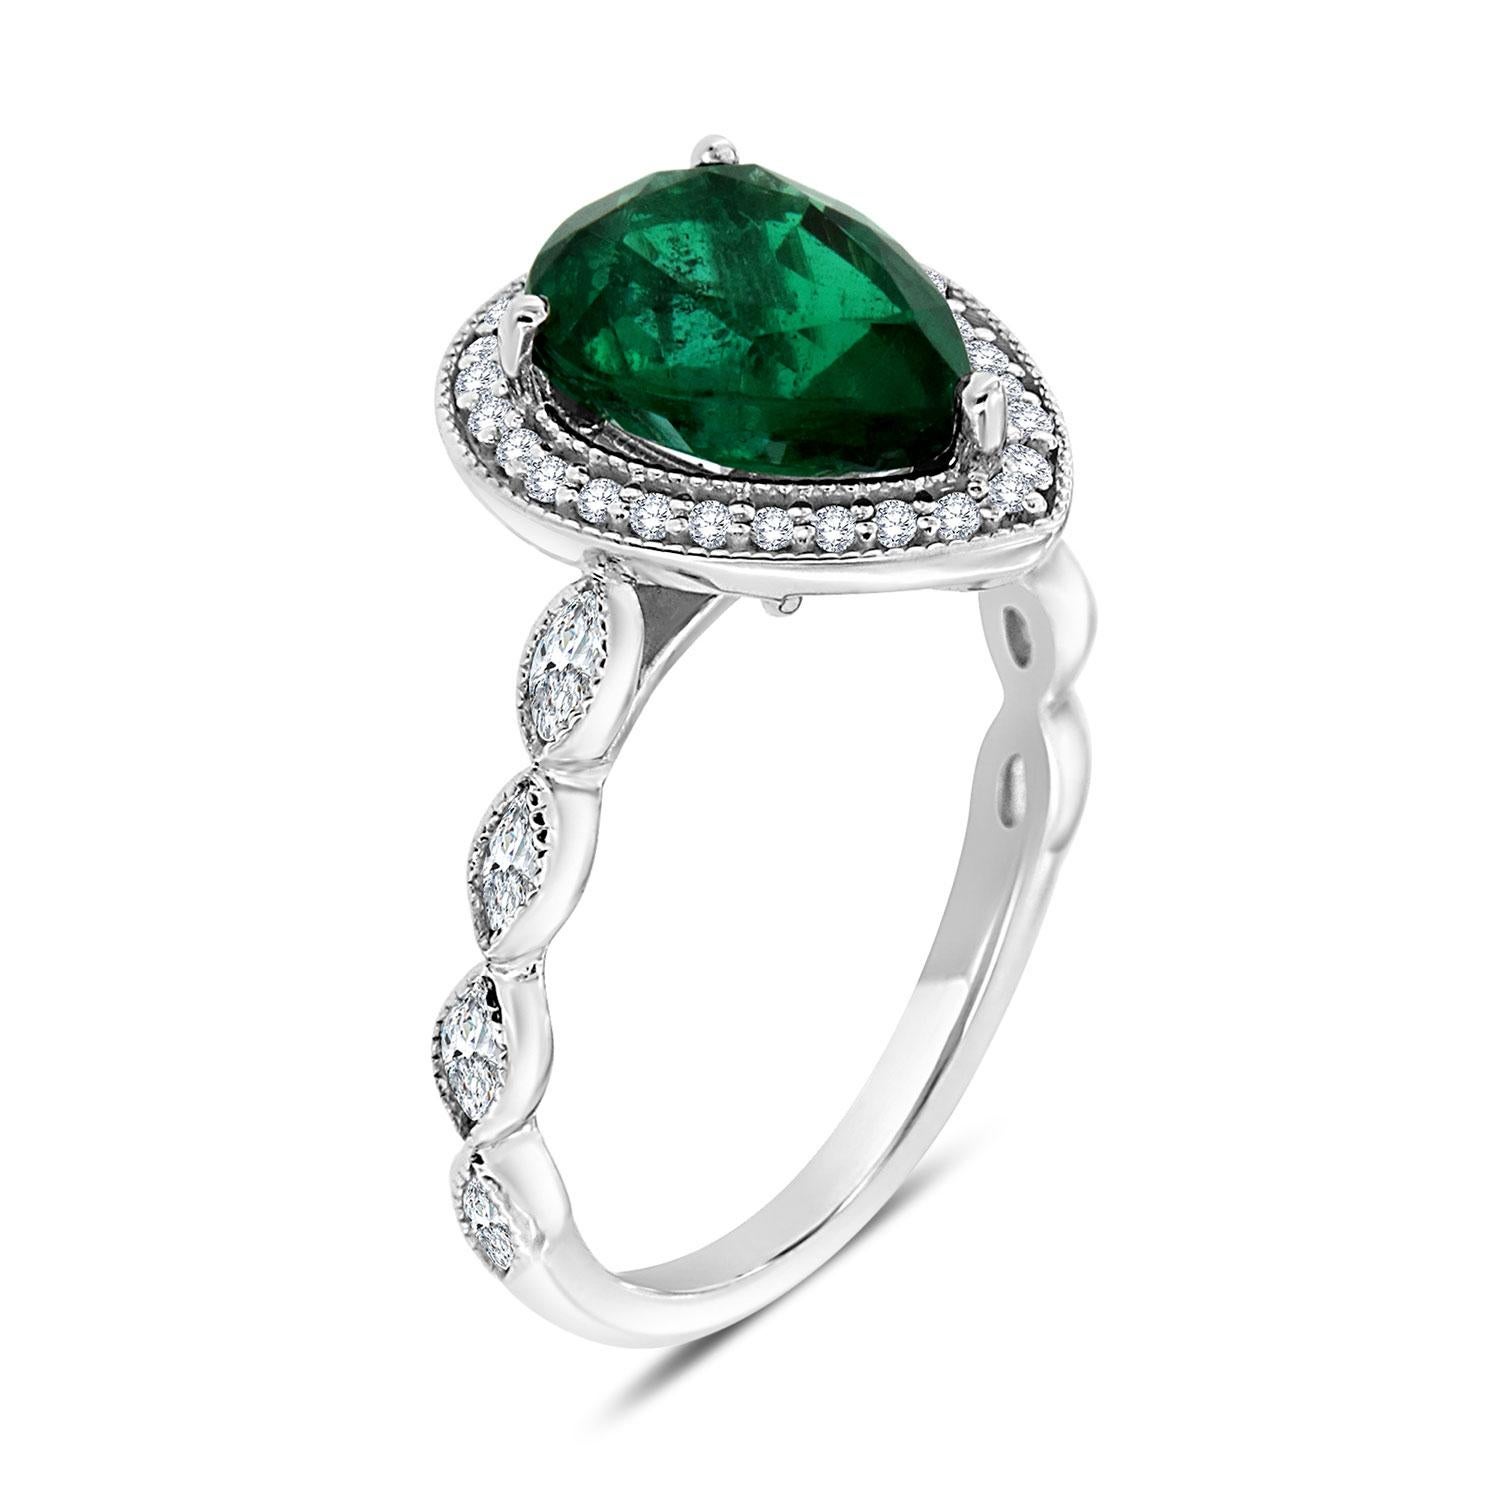 Wear Art every day! This delicate ring features a 1.95 Carat Pear- Shape vibrant Green Natural Emerald from Zambia in an excellent luster encircled by a halo of brilliant round diamonds with a touch of a milgrain design. From each side of the ring's